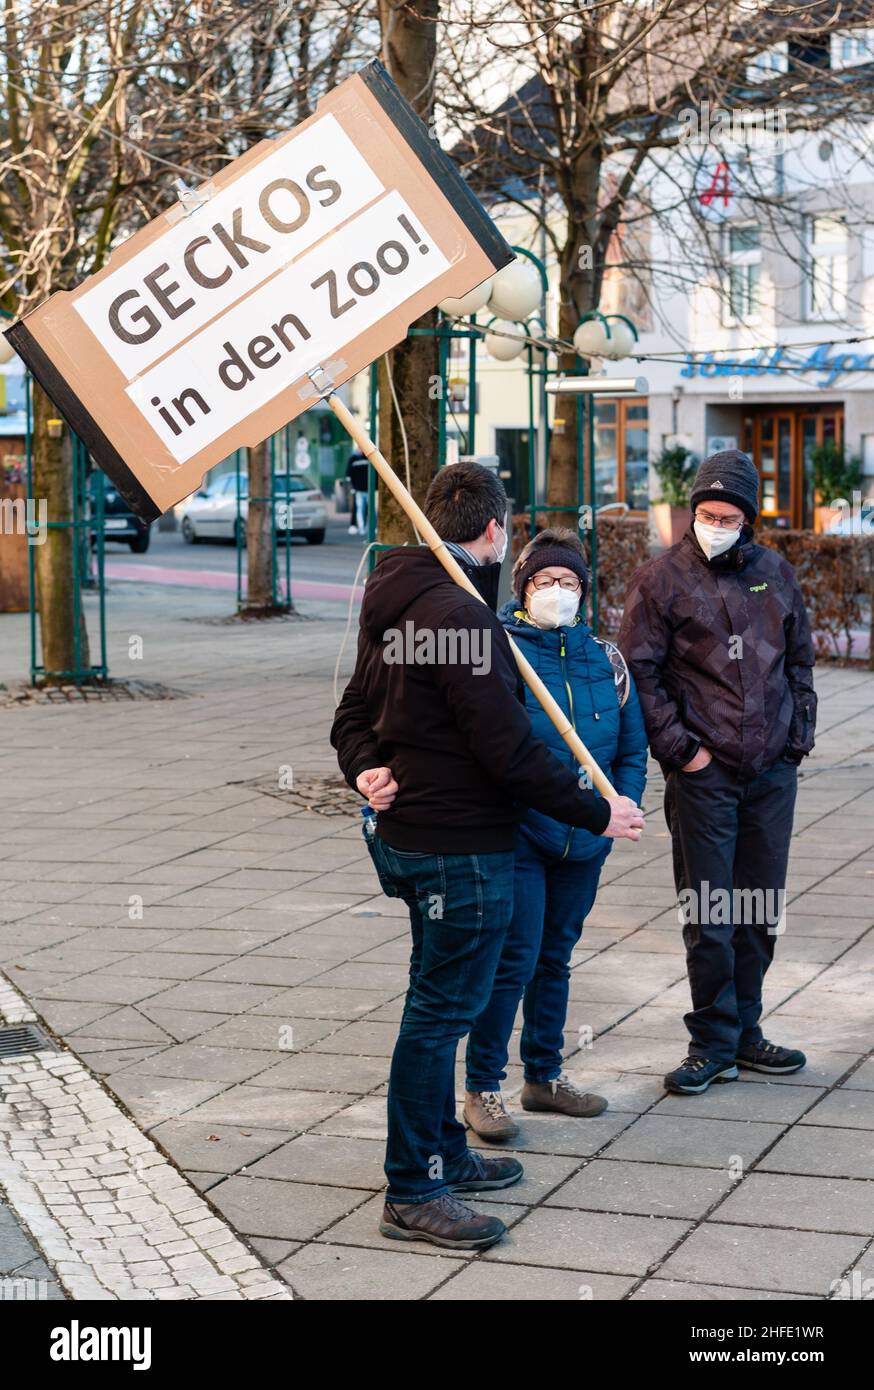 Amstetten, Austria - January 15 2022: Protesters Holding Sign at Demonstration or Protest of MFG Menschen Freiheit Grundrechte Party against Mandatory Stock Photo